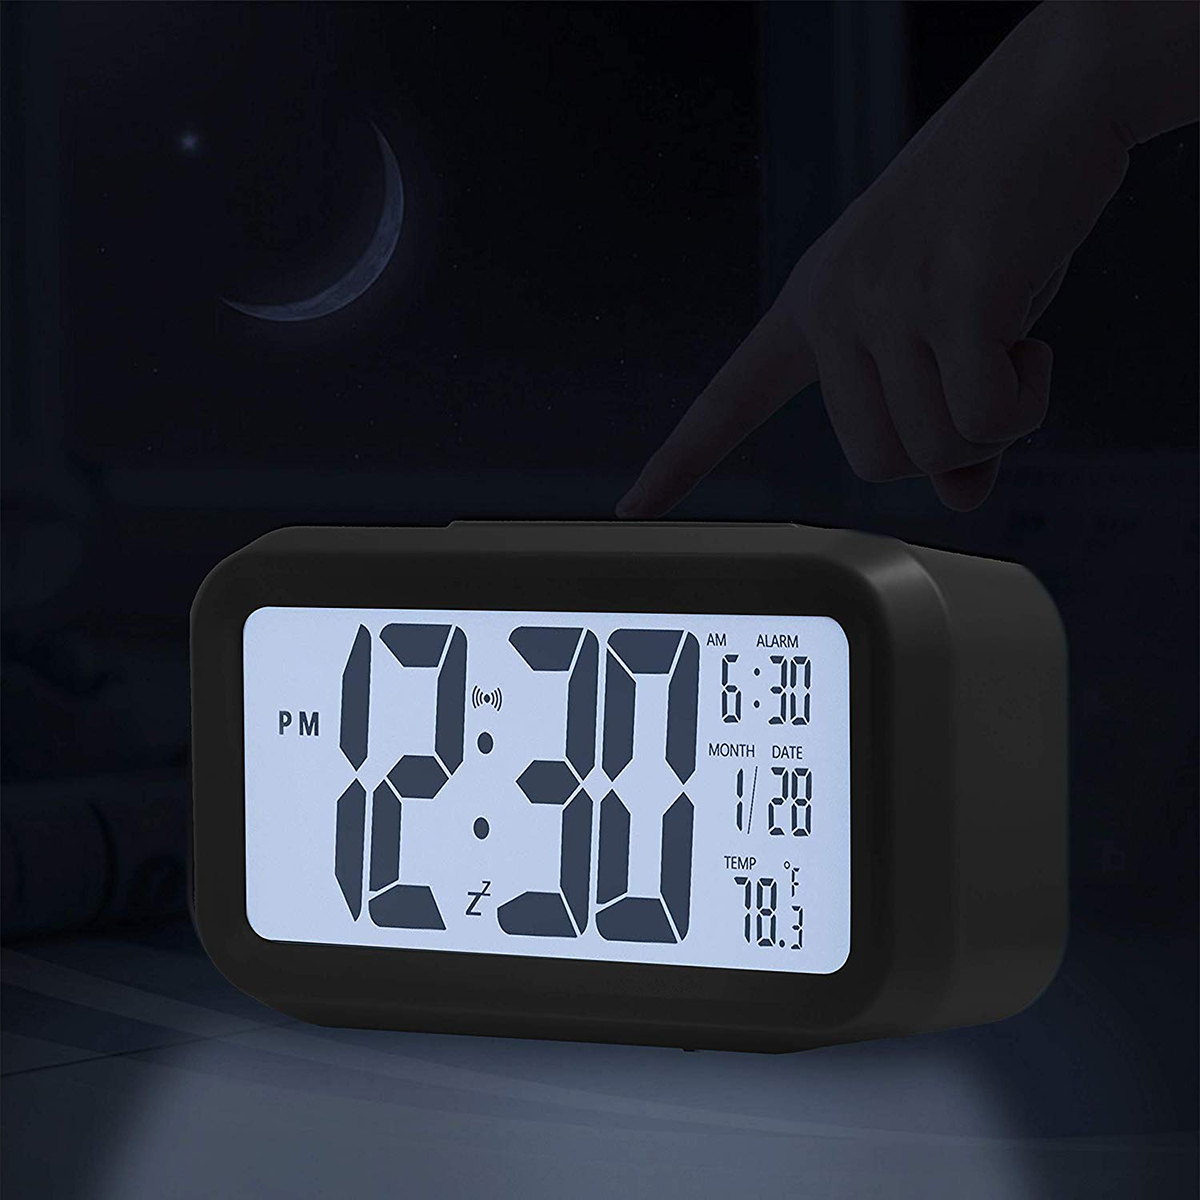 Backlight-LCD-Digital-Alarm-Clock-45quot32quot-Large-Display-Night-Light-with-Calendar-Thermometer-E-1760102-6